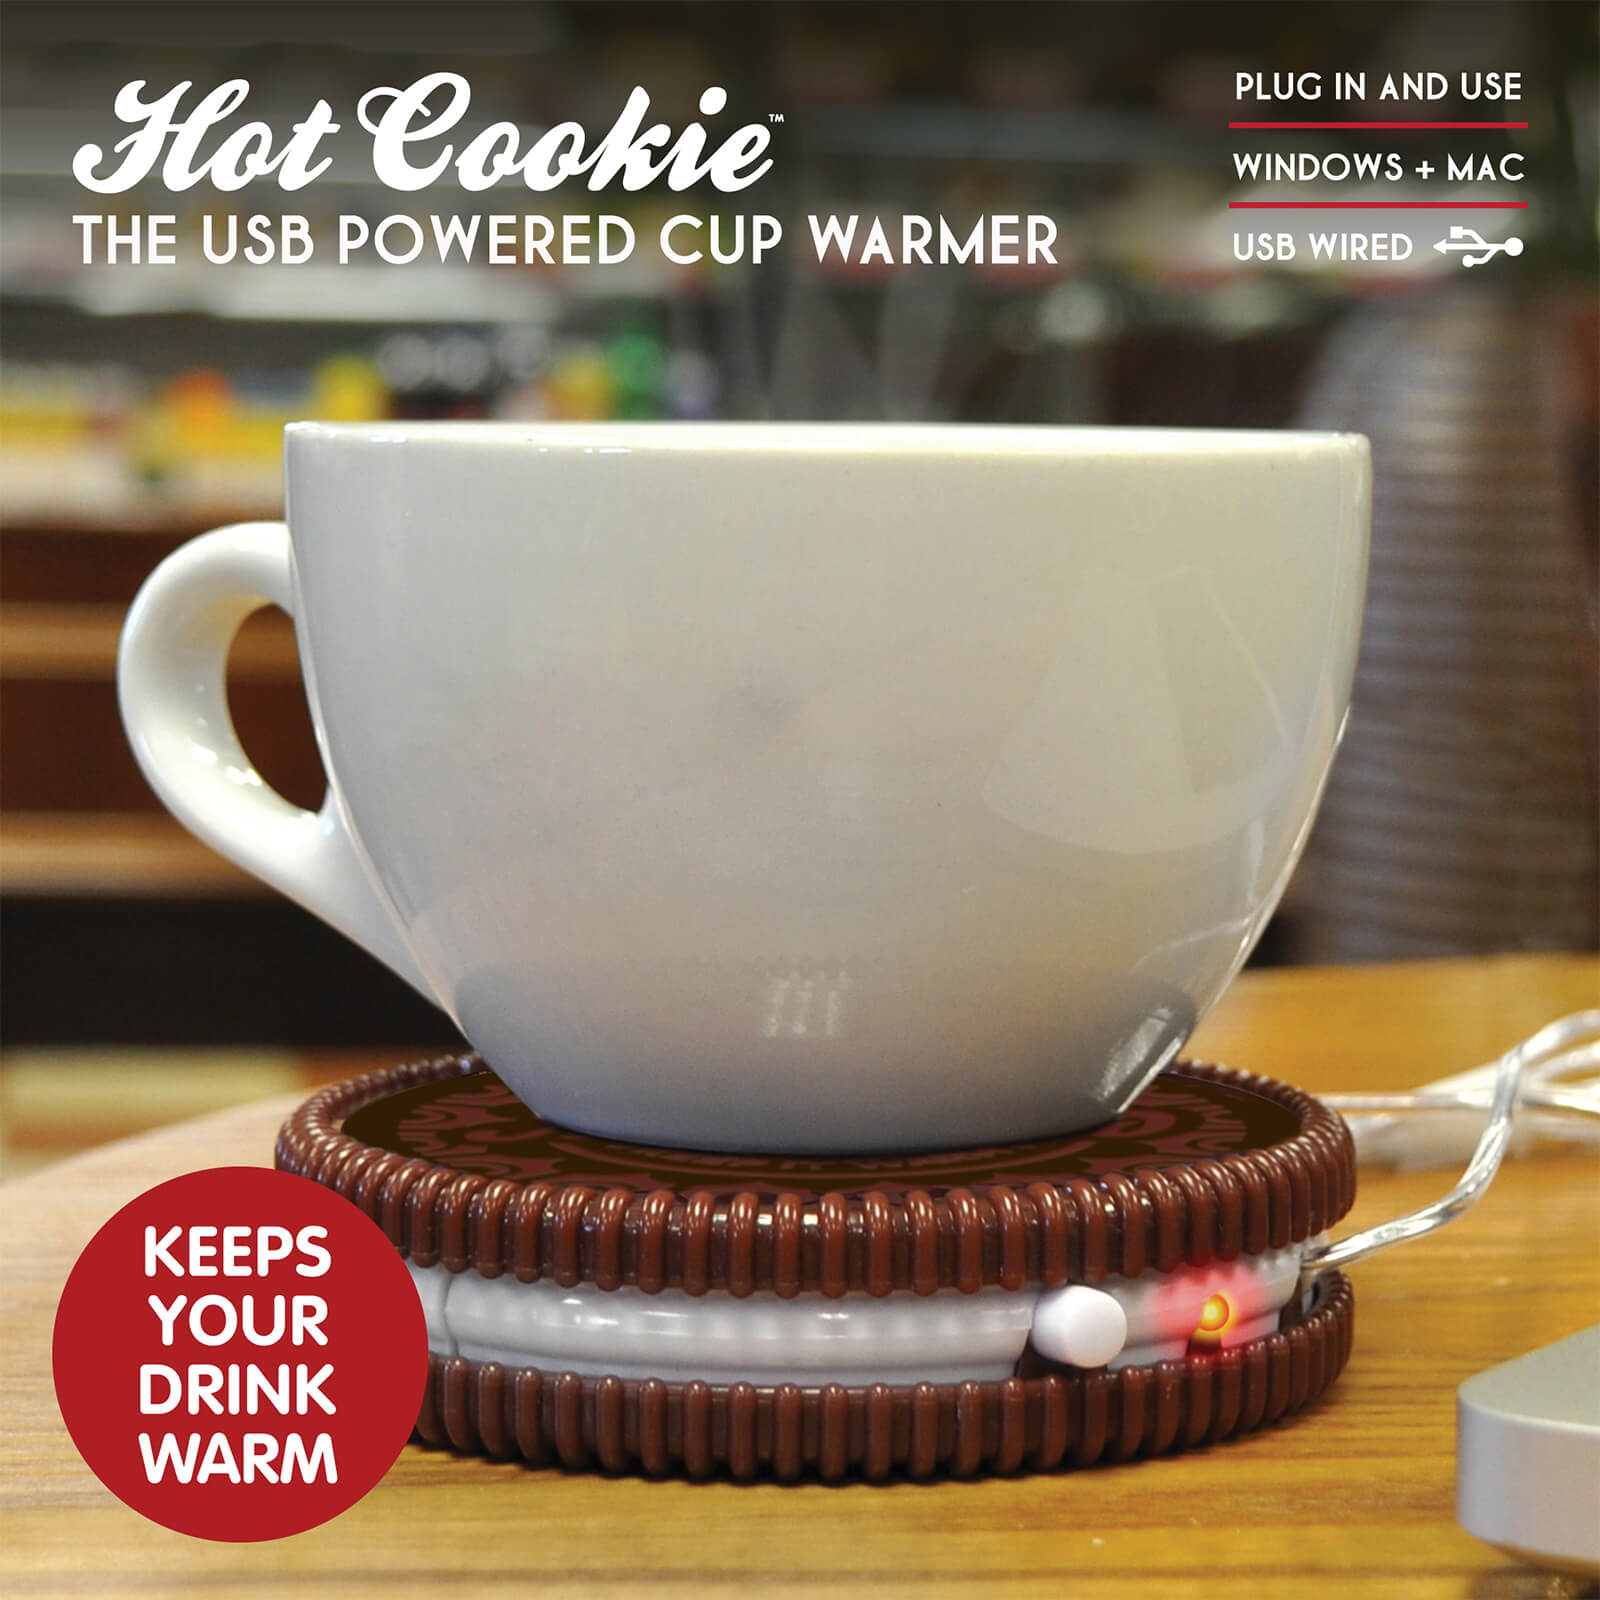 Hot Cookie. The USB Powered Cup Warmer, Keep your Drinks warm. Plug in and use. Windows + Mac. USB Wired.